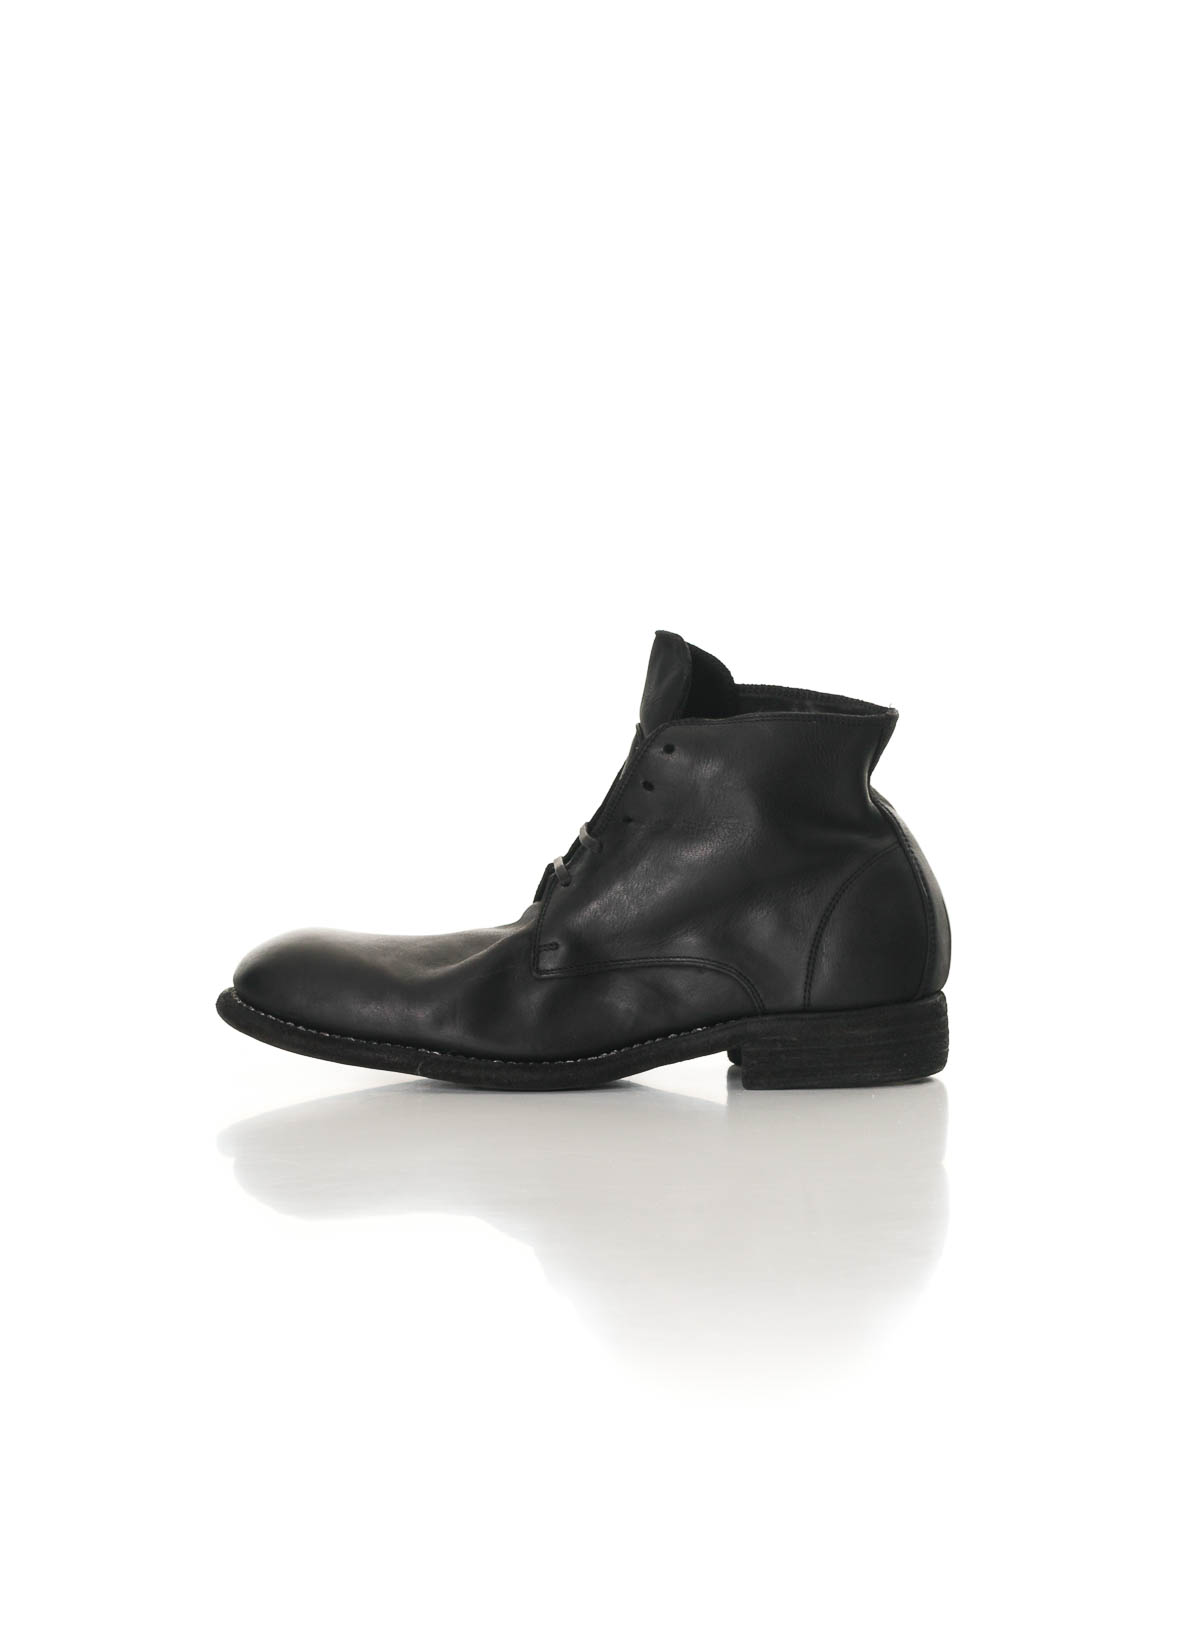 hide-m | GUIDI Men 993 Classic Lace Up Ankle Boot, black horse leather